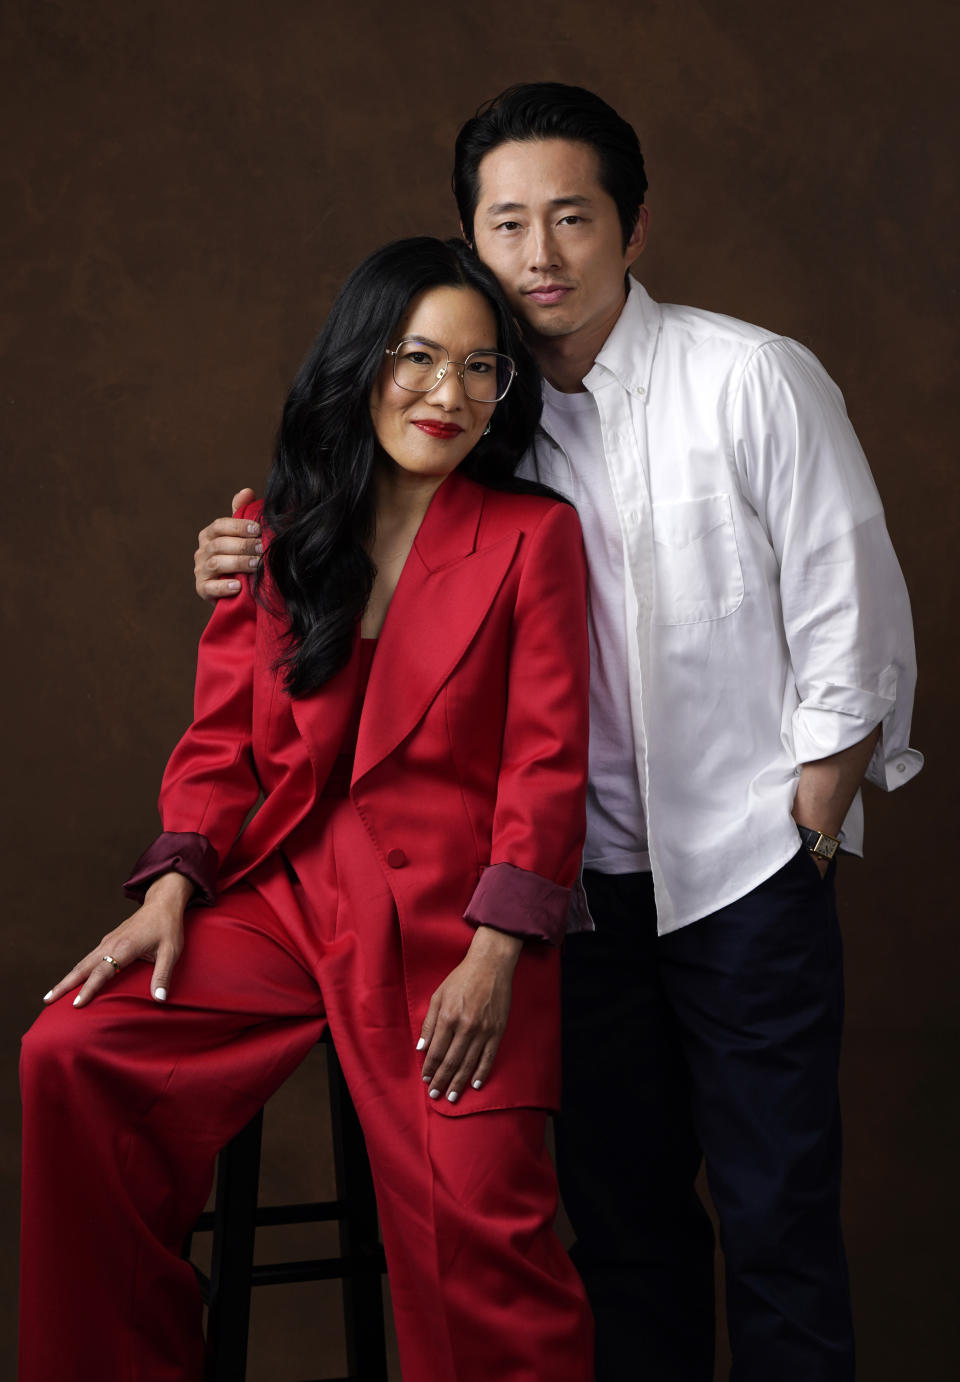 Ali Wong, left, and Steven Yeun, the co-stars of the Netflix series "Beef," pose together for a portrait, Tuesday, March 28, 2023, at the London Hotel in West Hollywood, Calif. (AP Photo/Chris Pizzello)